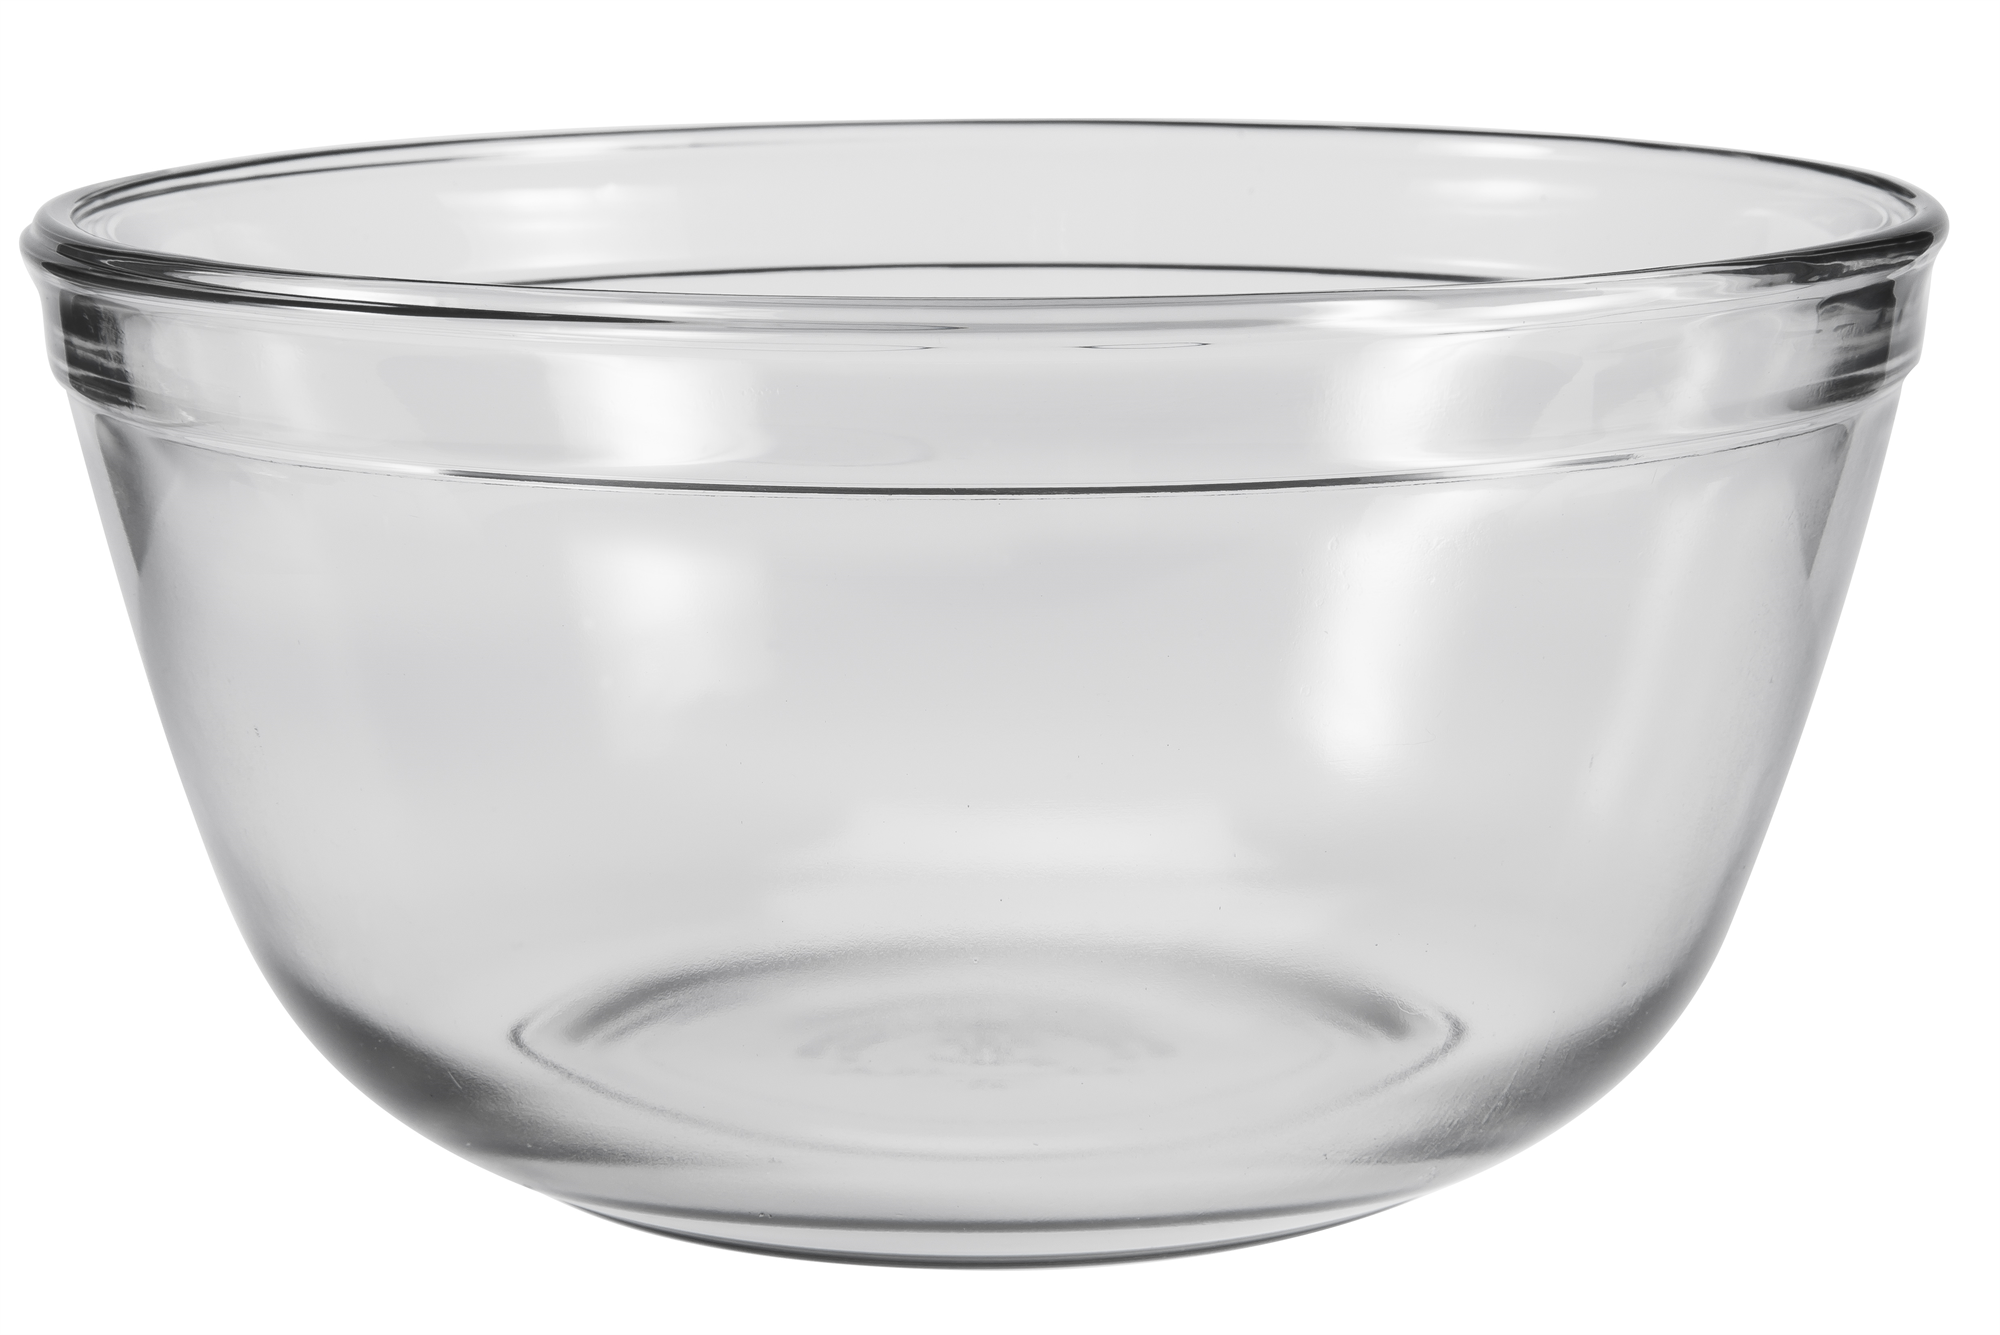 Buy the Anchor Hocking Glass Mixing Bowl 4 Litre online at smithsofloughton.com 